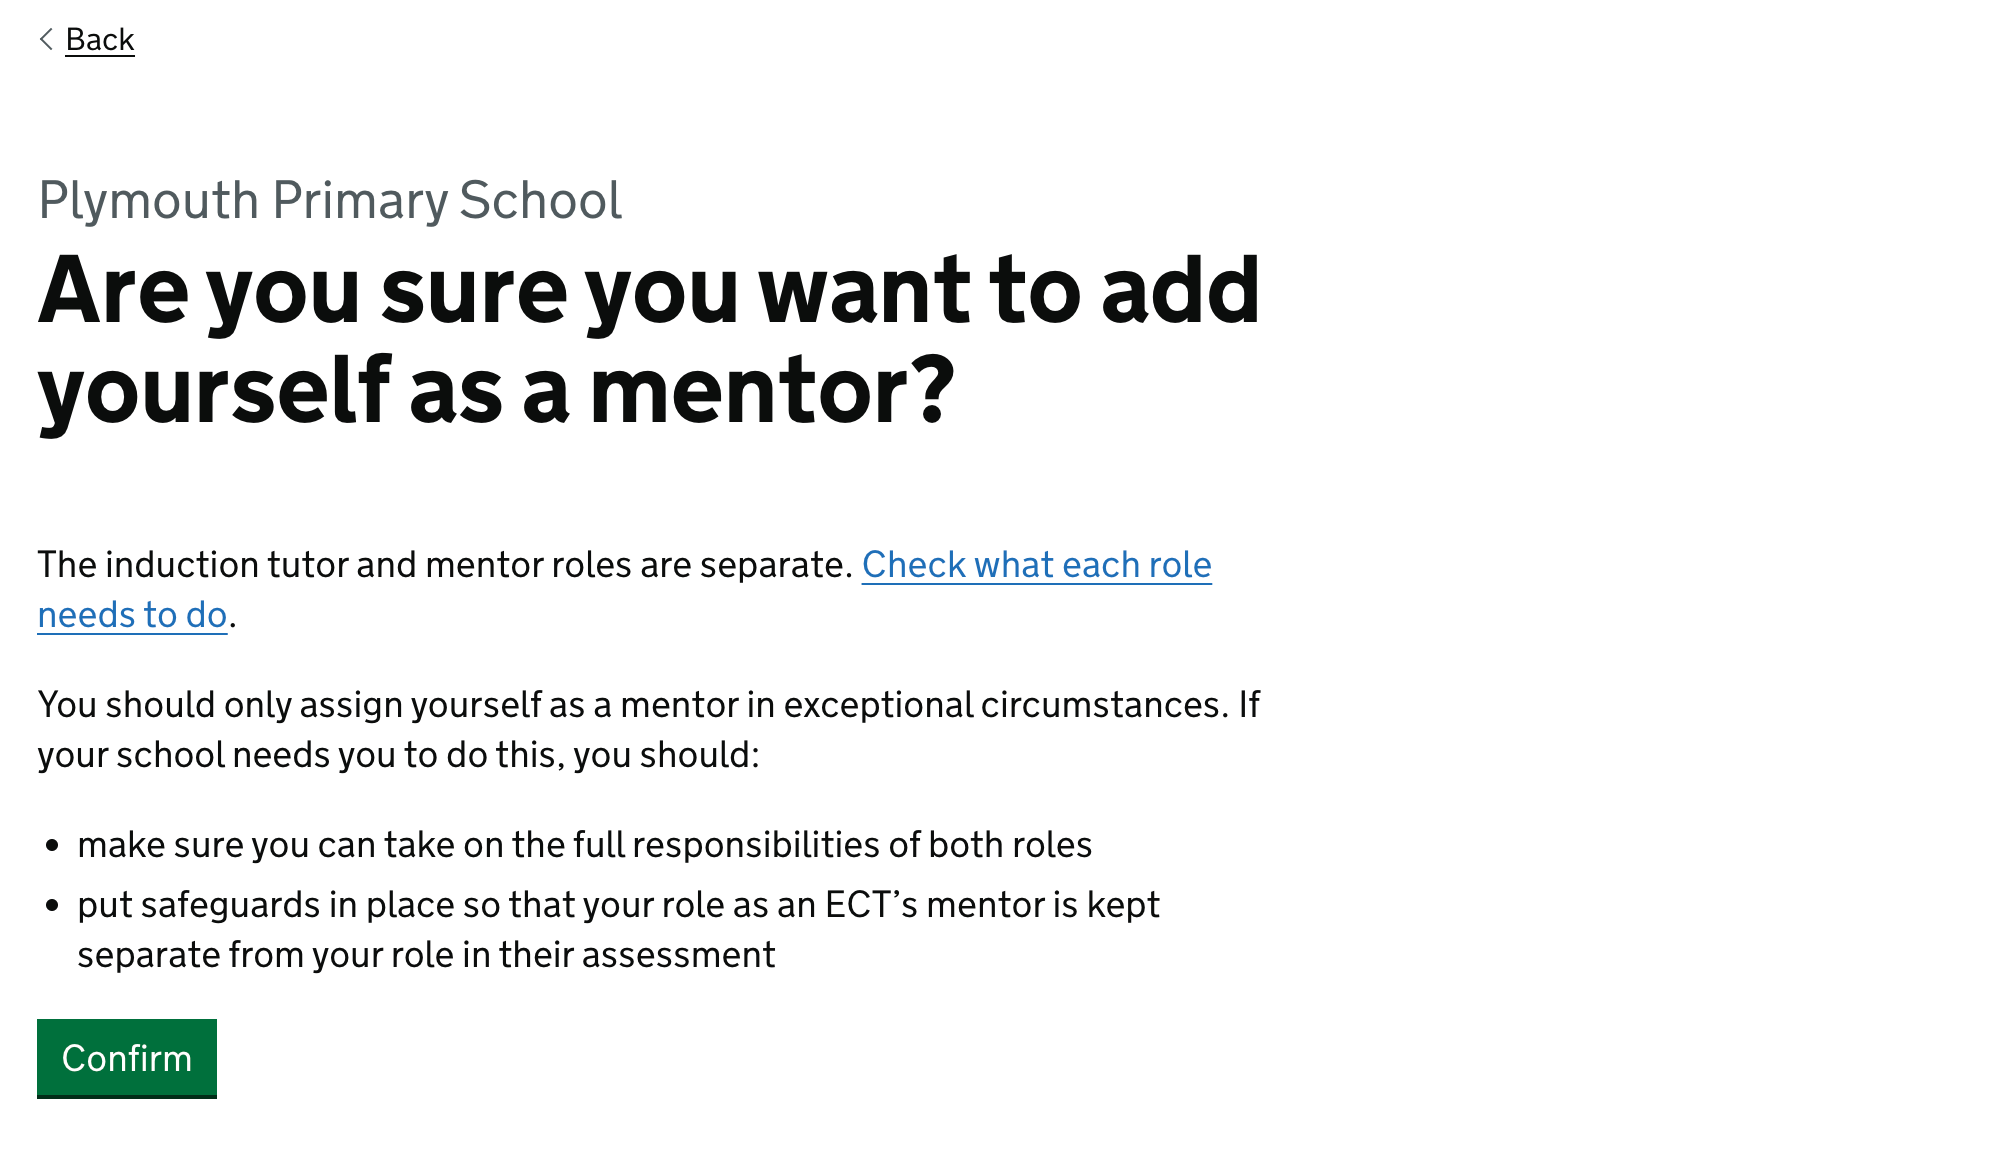 Screenshot with the title “Are you sure you want to add yourself as a mentor?”